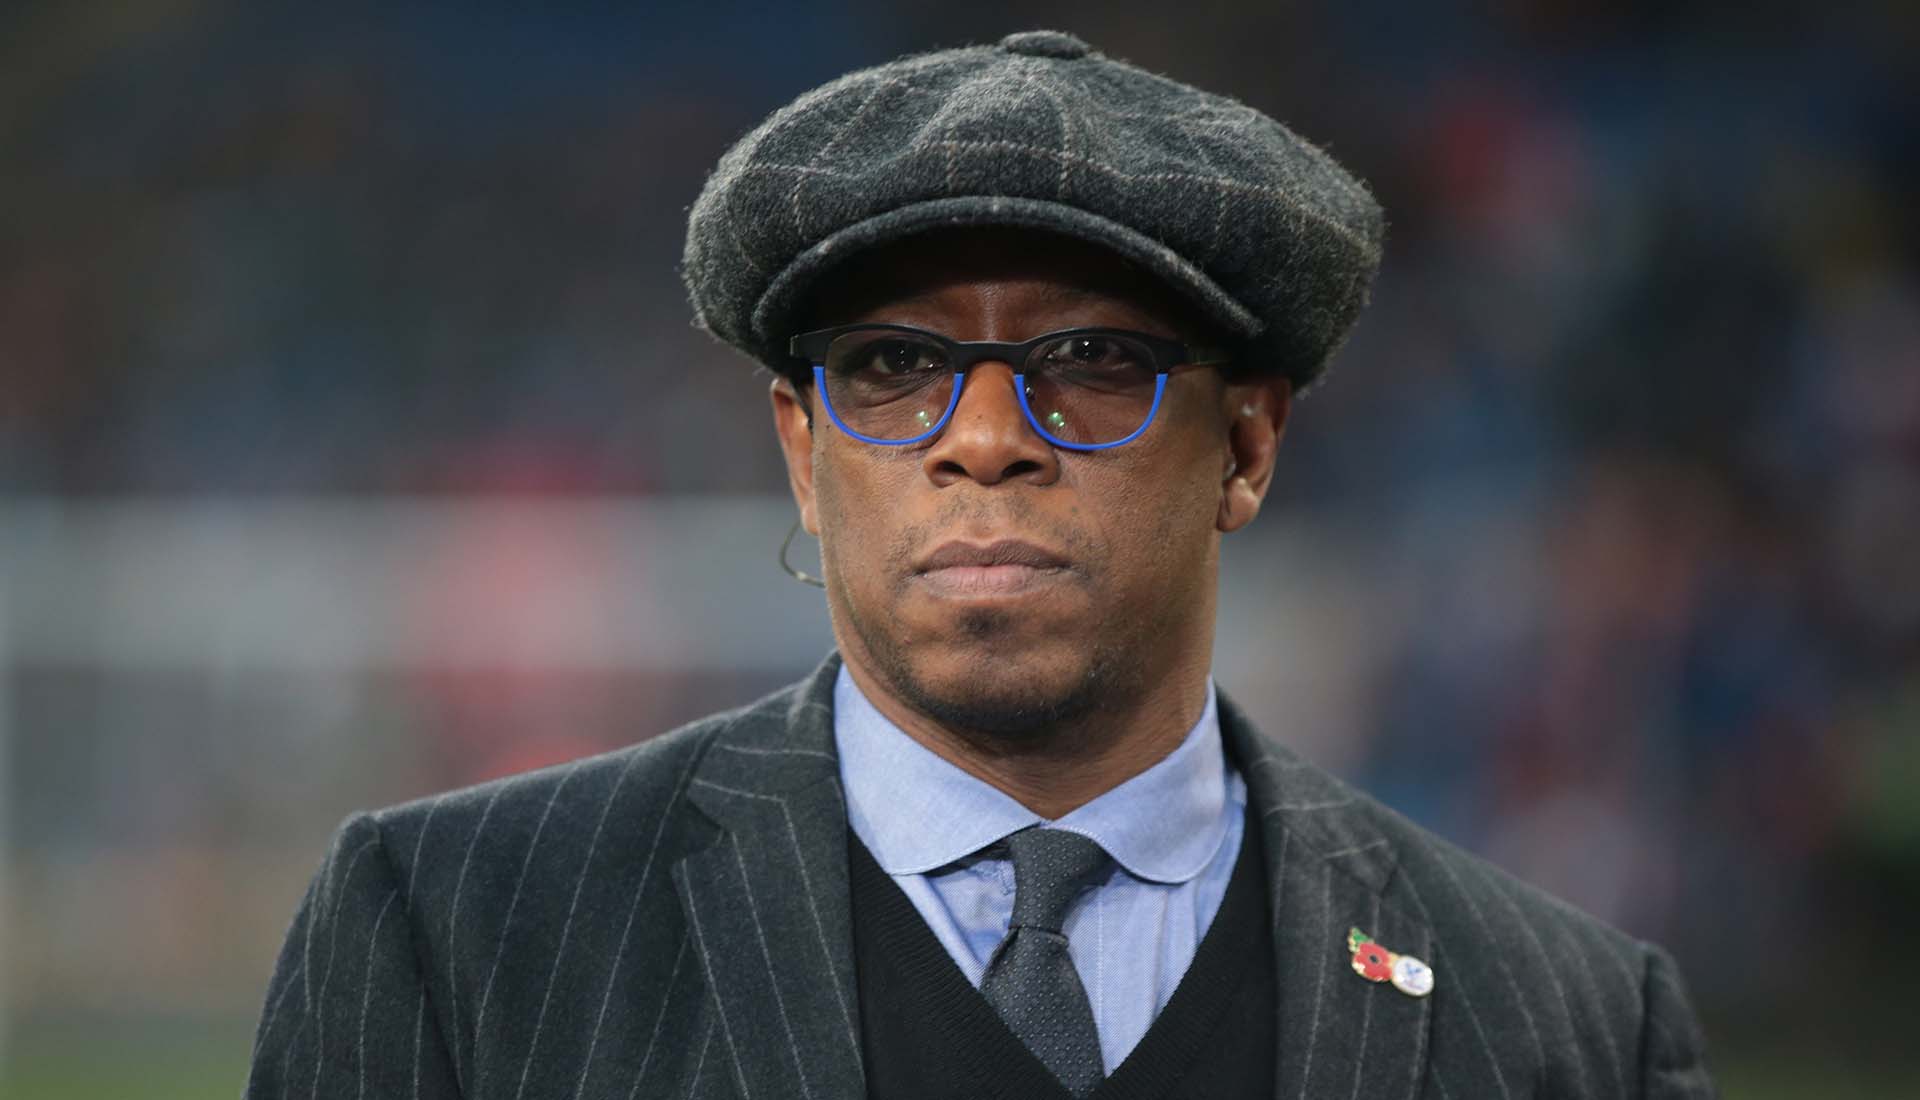 header ian wright dial up soccerbible_0000_GettyImages-619286308.jpg